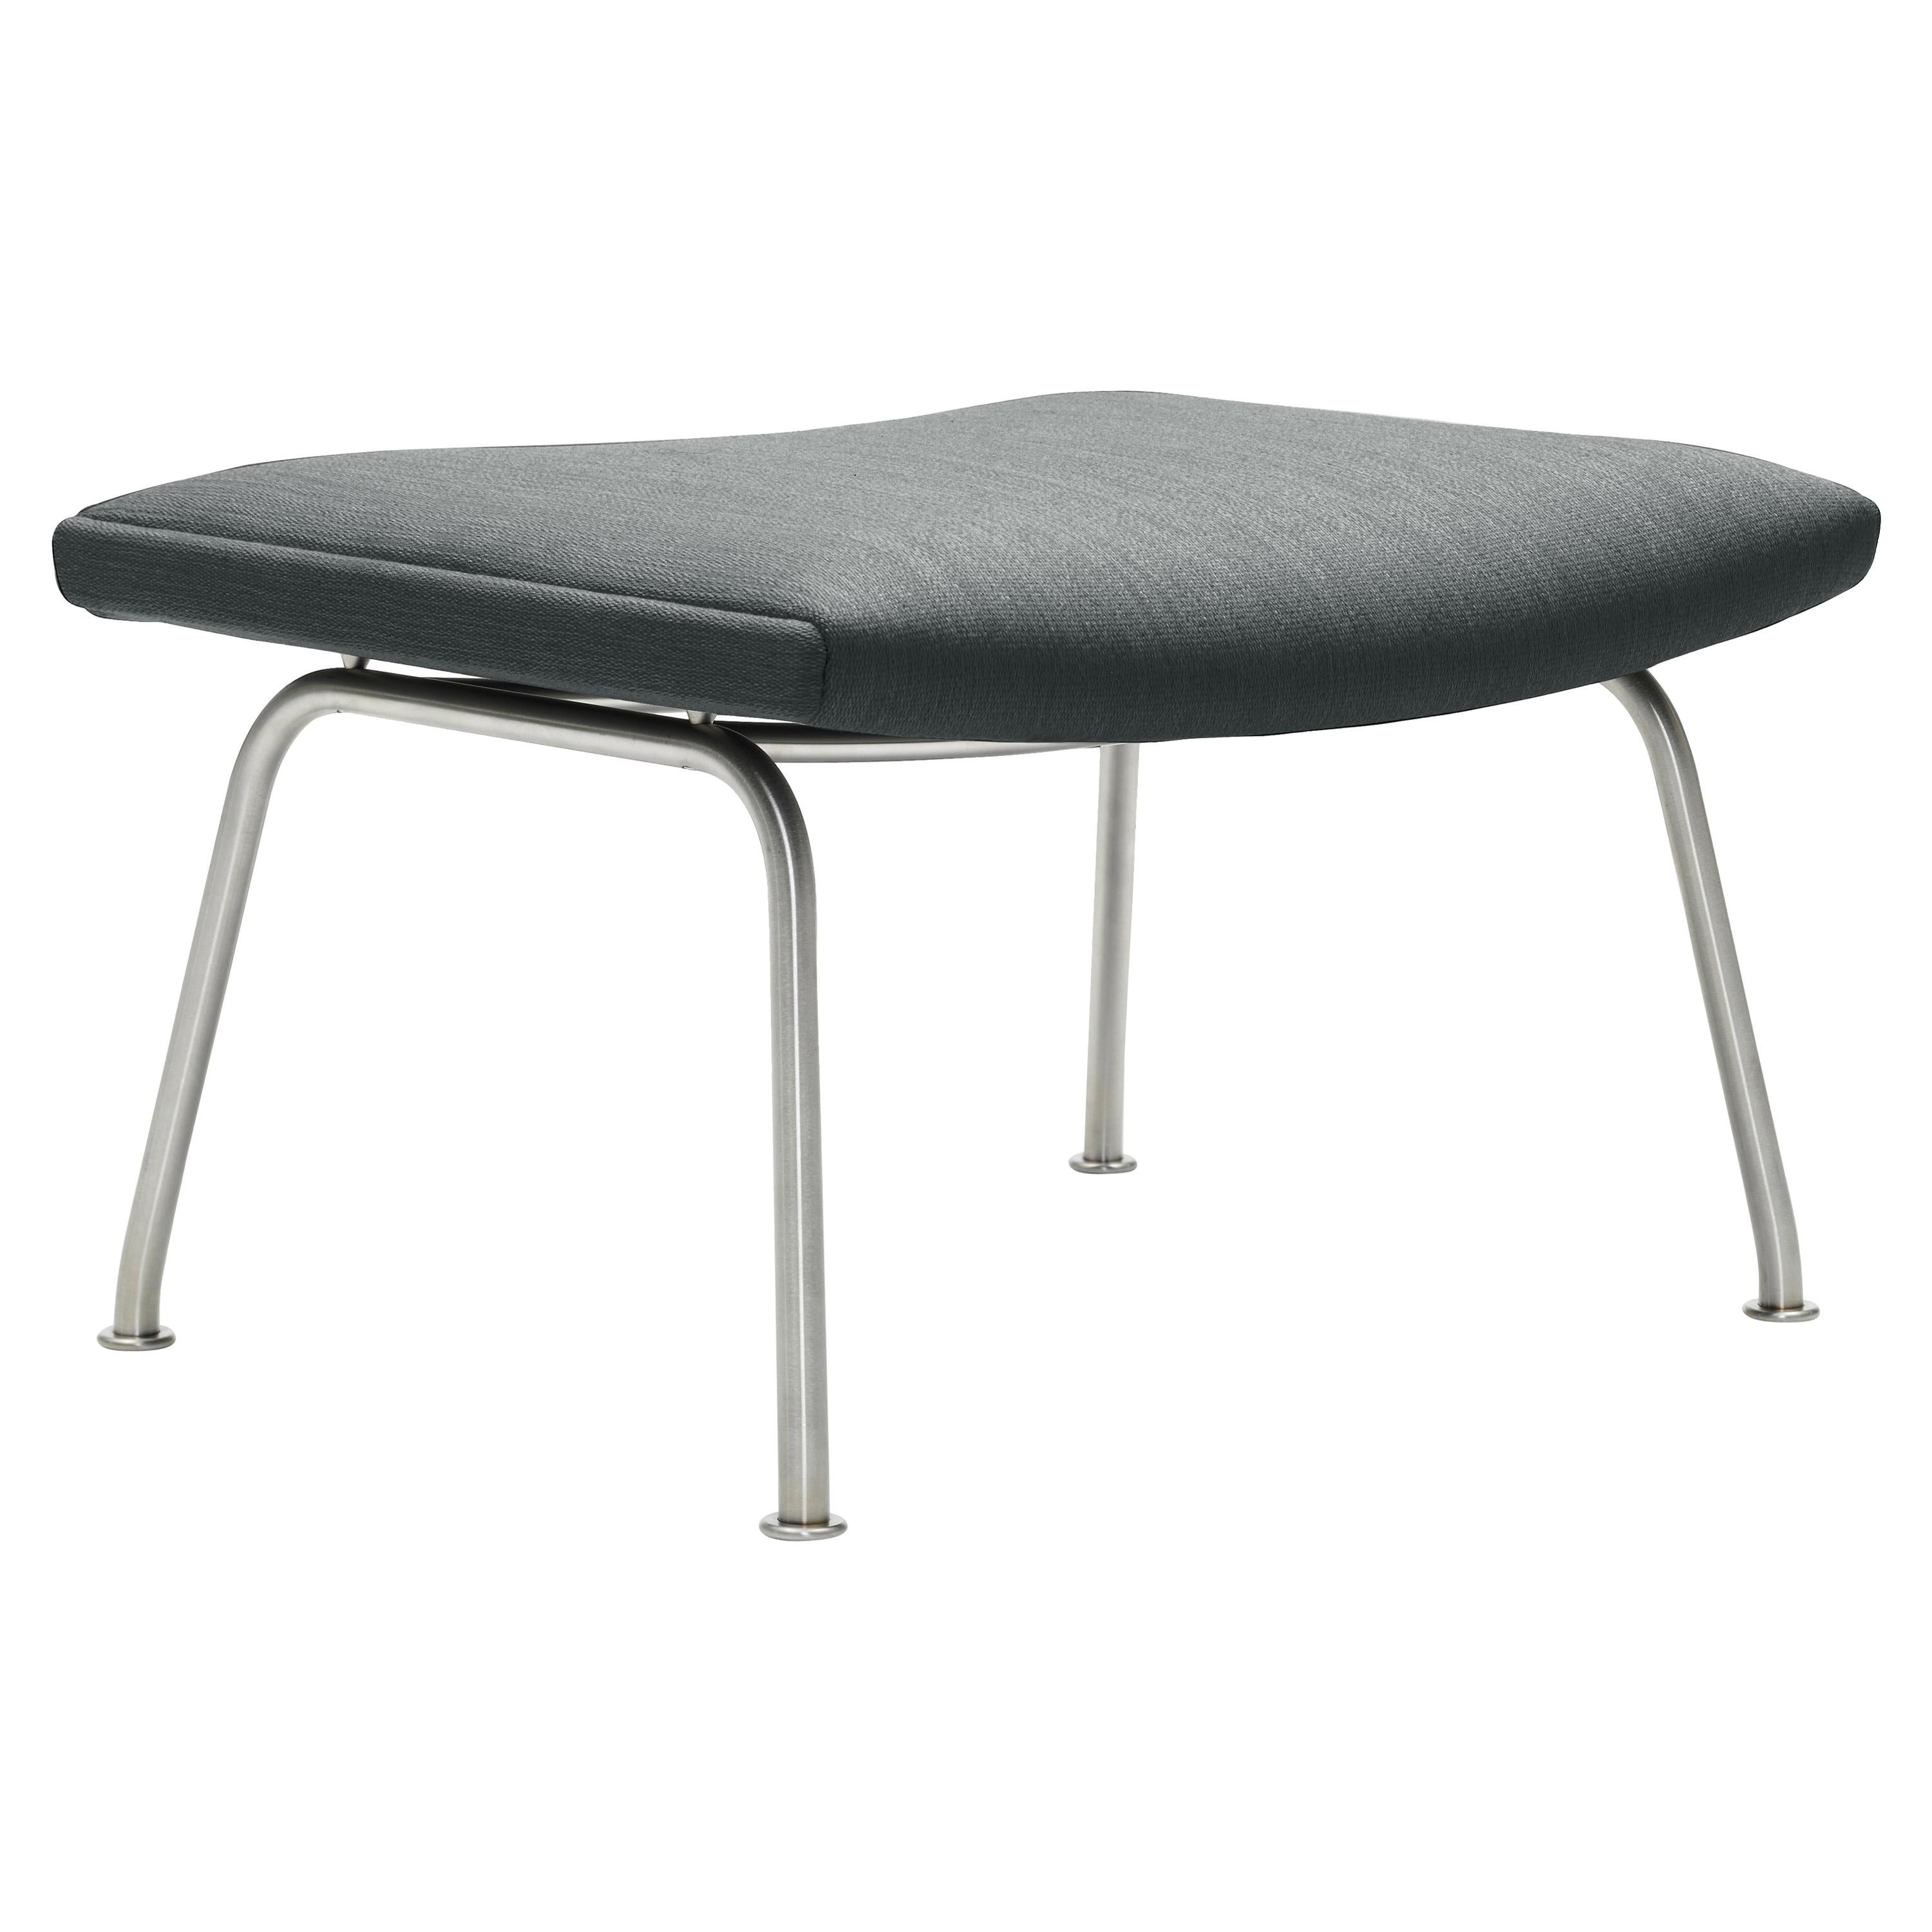 Gray (Kvadrat Fiord 151) CH446 Footrest in Stainless Steel with Fabric Seat by Hans J. Wegner